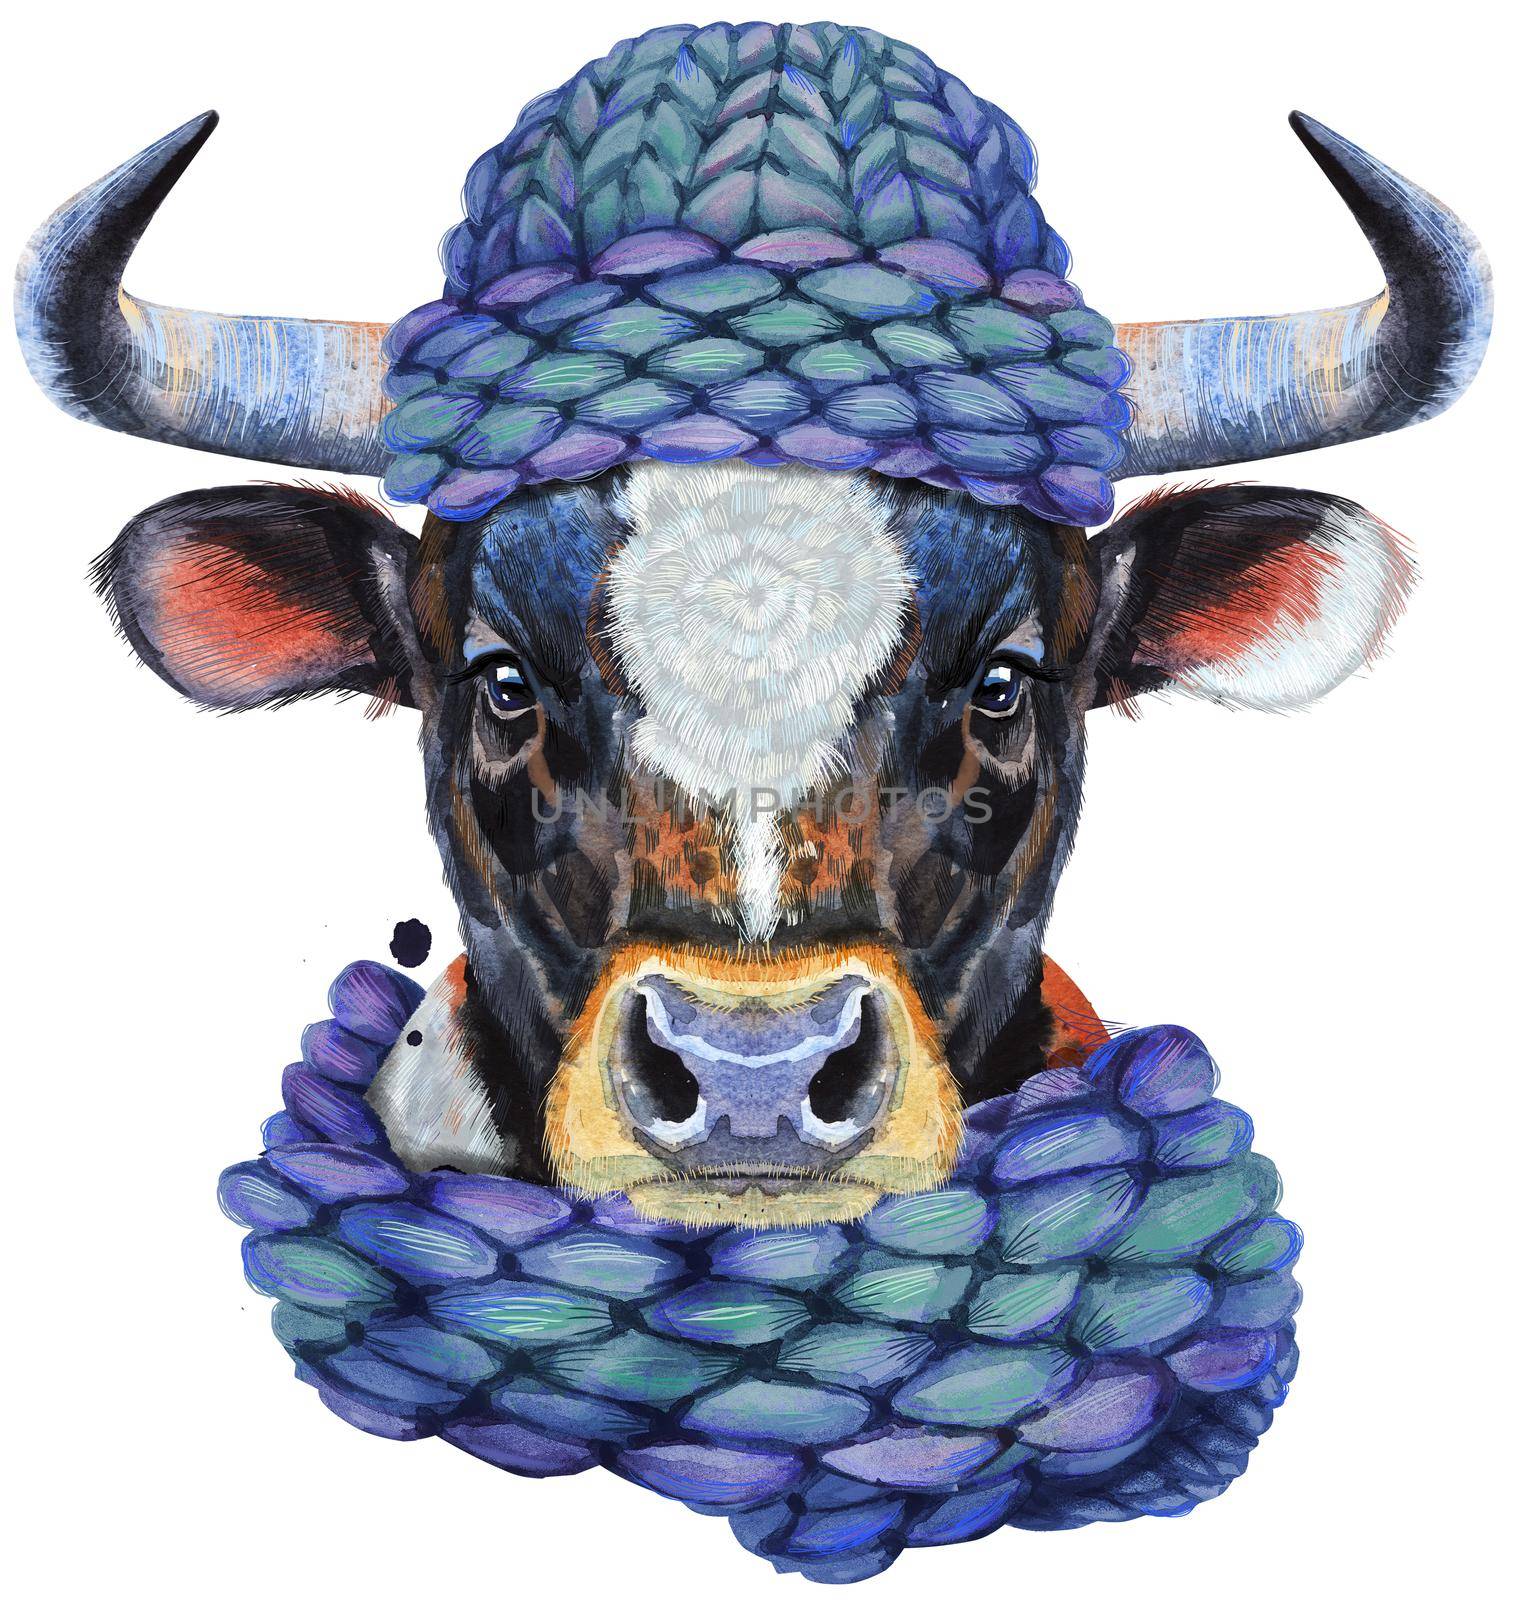 Bull with white spot in knitted blue hat. Watercolor graphics. Bull animal illustration with splashes watercolor textured background.